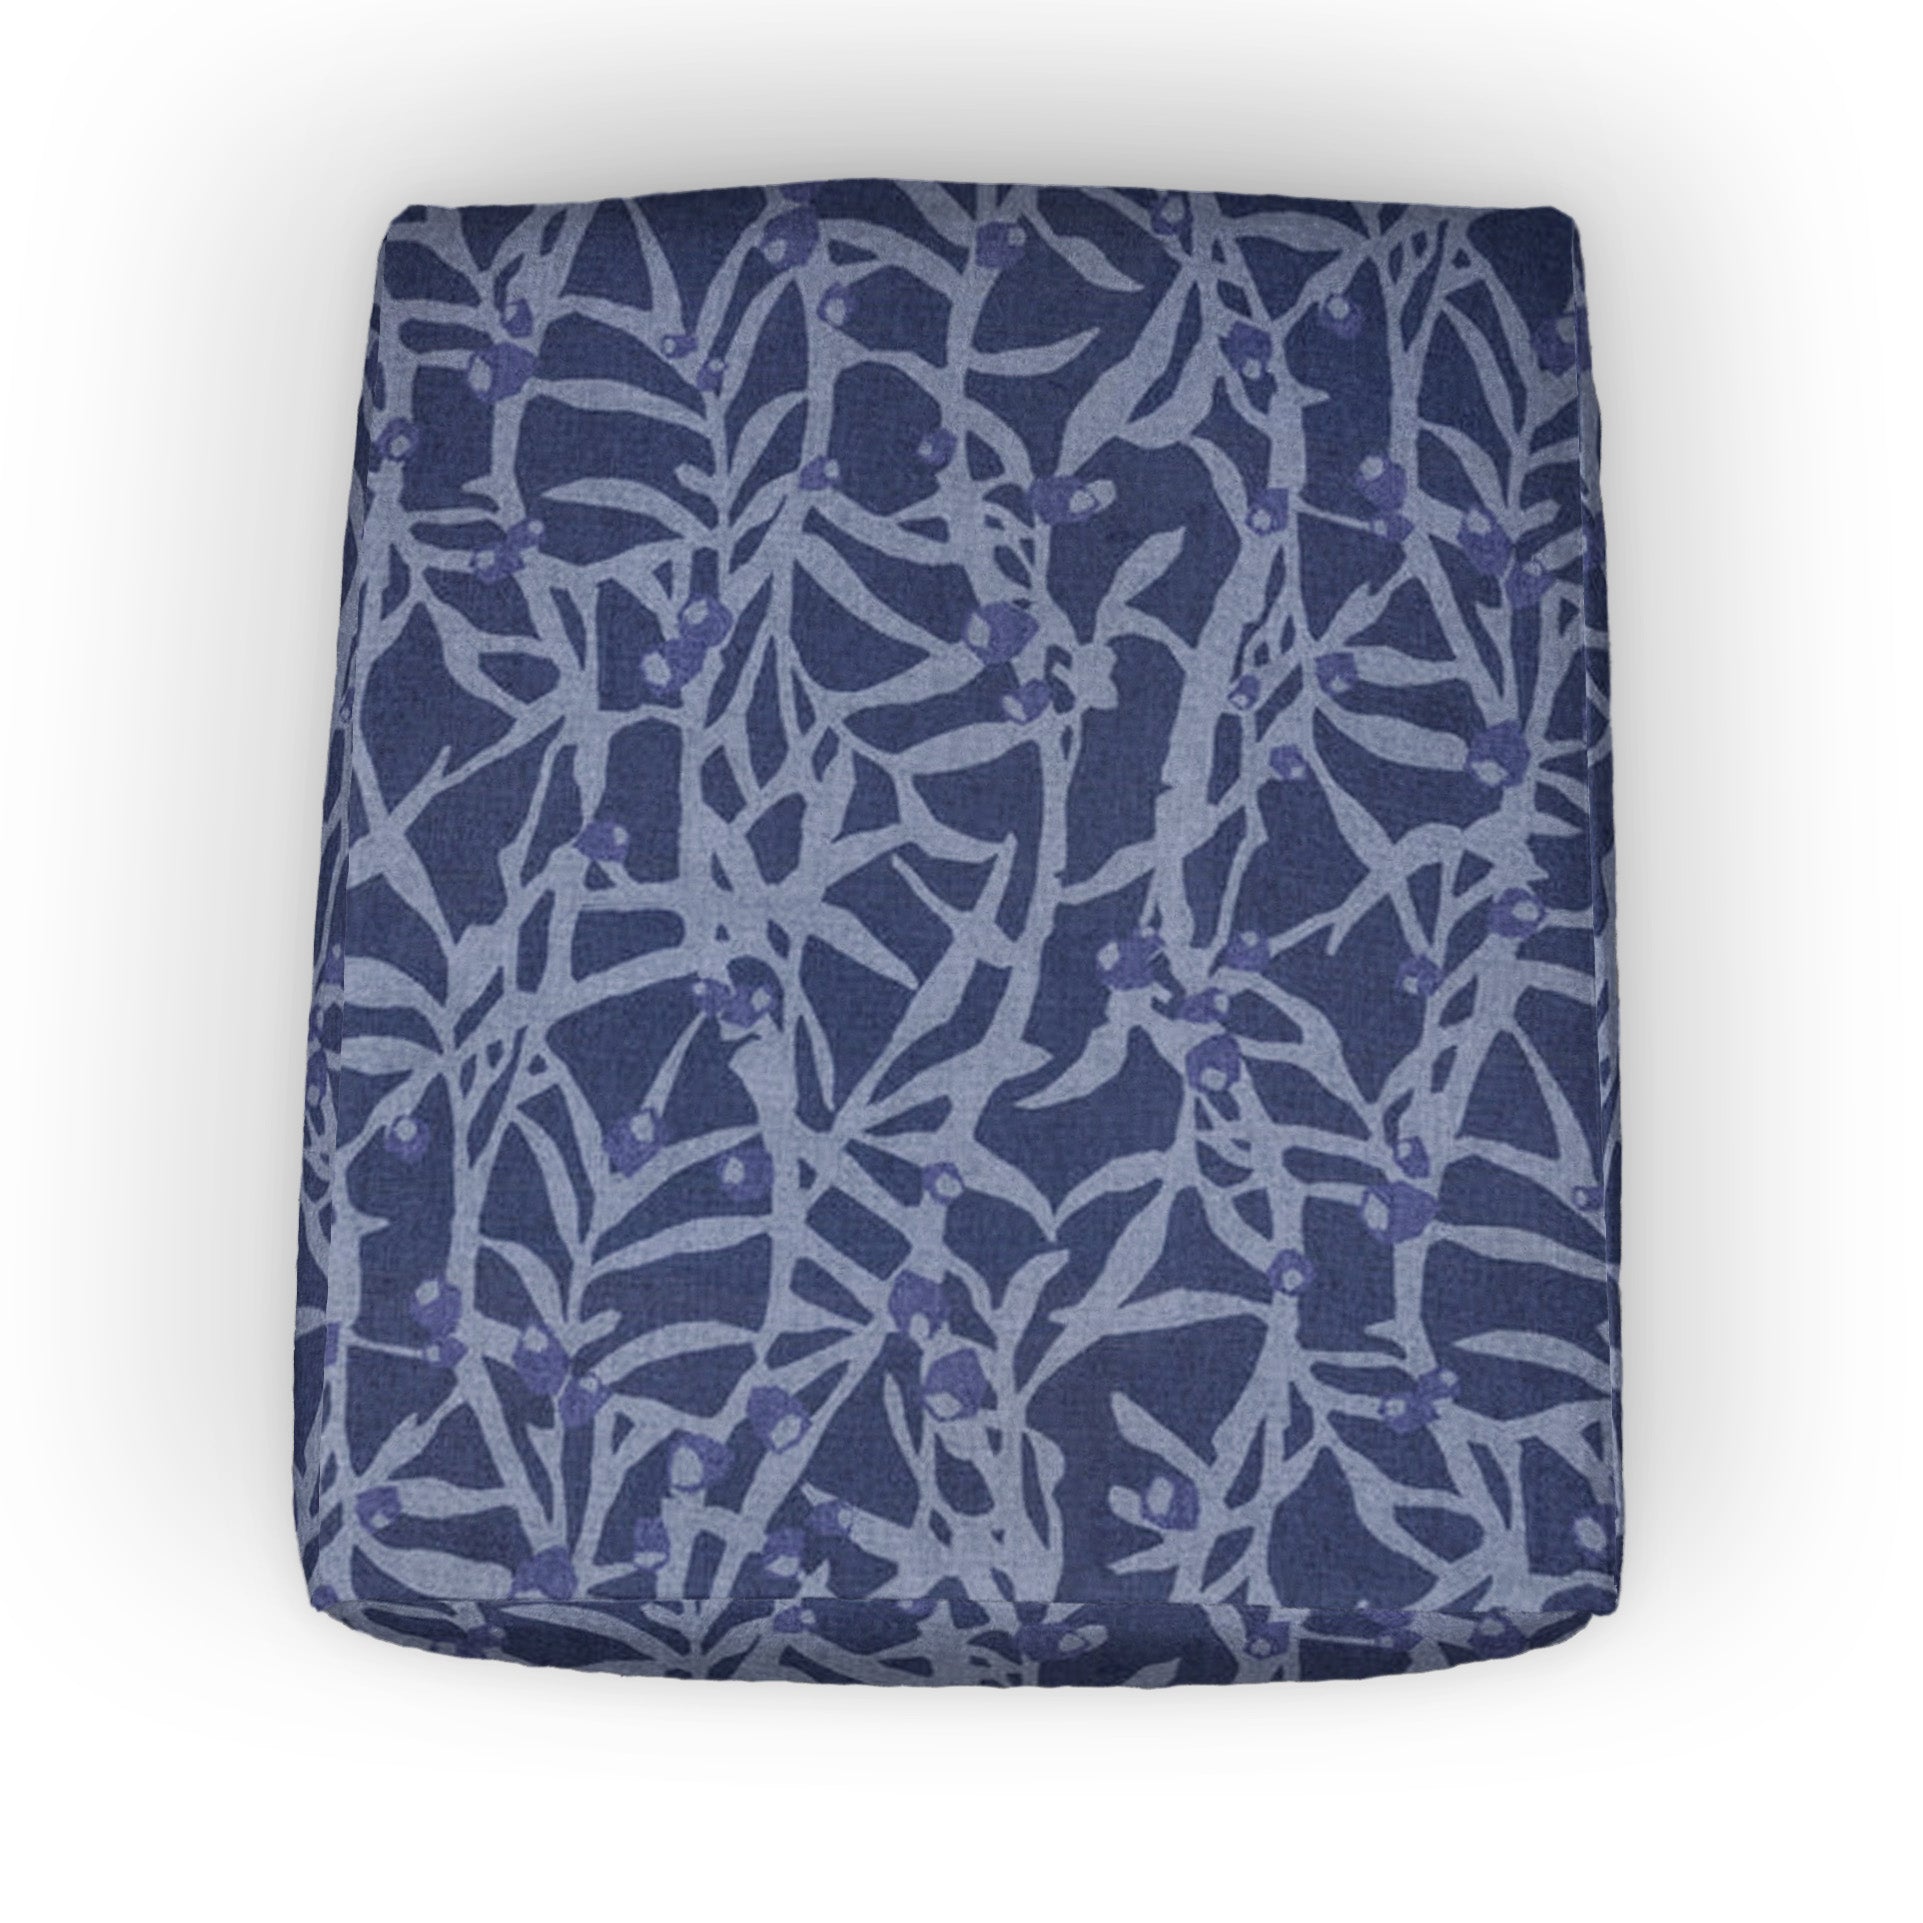 Custom Elastic Fitted & Protective Cushion Cover - Origami Branches